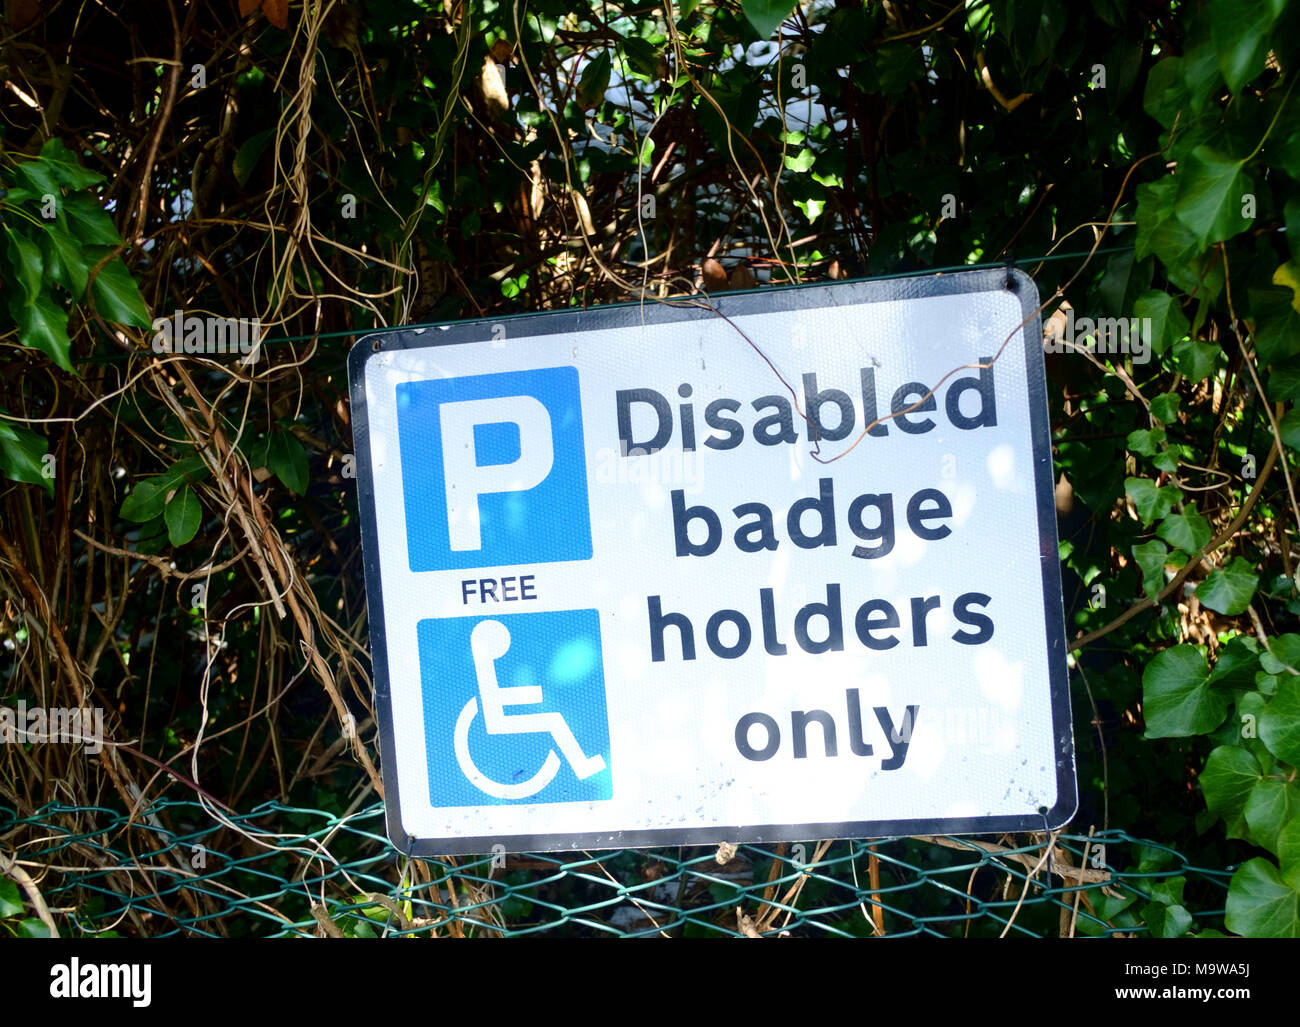 Car Parking in Somerset City of Bath,england UK disabled badge holders only Stock Photo